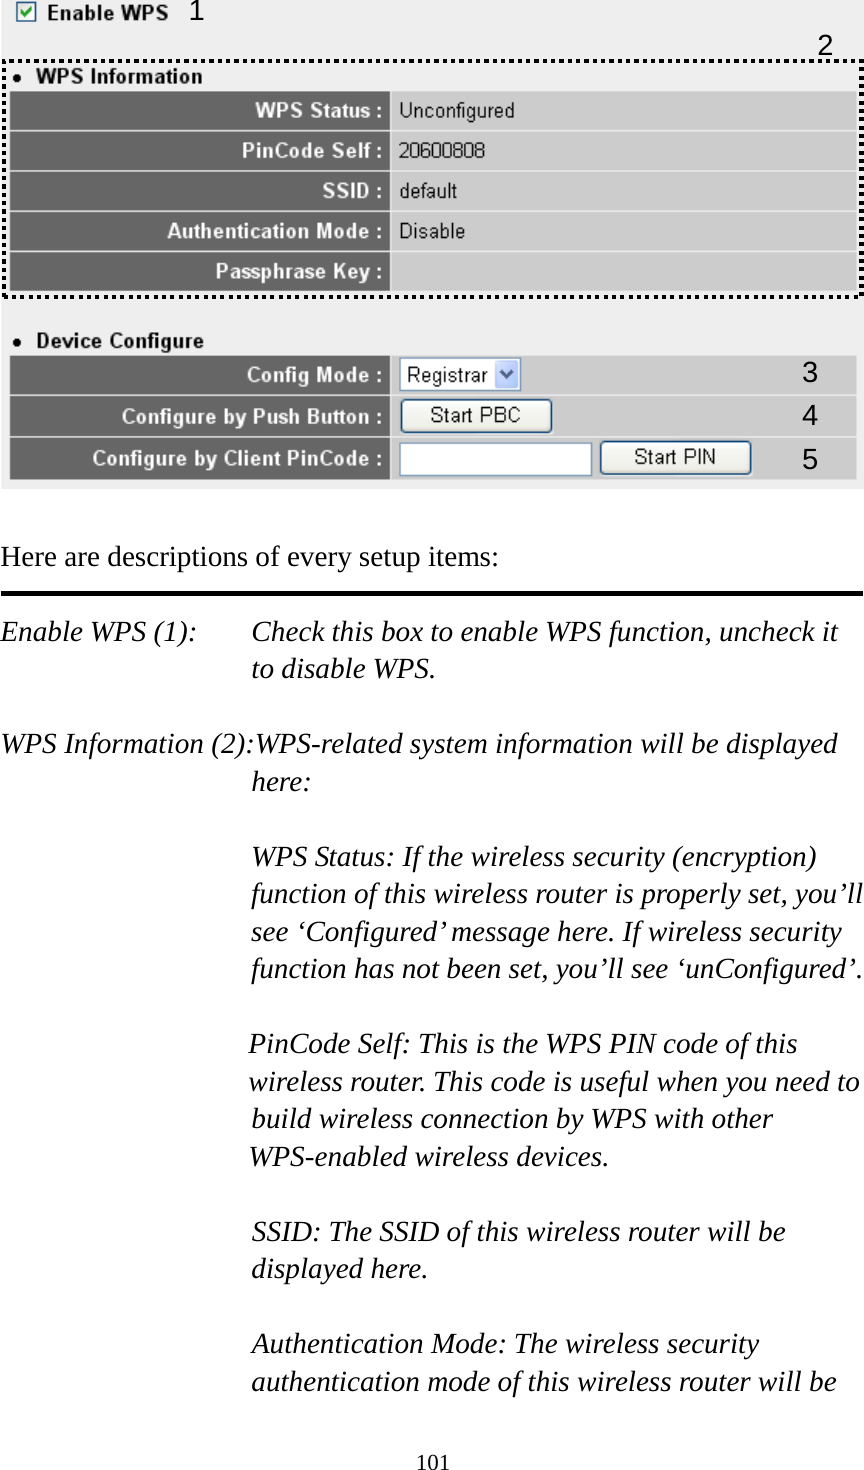 101   Here are descriptions of every setup items:  Enable WPS (1):  Check this box to enable WPS function, uncheck it to disable WPS.  WPS Information (2):WPS-related system information will be displayed here:  WPS Status: If the wireless security (encryption) function of this wireless router is properly set, you’ll see ‘Configured’ message here. If wireless security function has not been set, you’ll see ‘unConfigured’.  PinCode Self: This is the WPS PIN code of this wireless router. This code is useful when you need to  build wireless connection by WPS with other WPS-enabled wireless devices.  SSID: The SSID of this wireless router will be displayed here.  Authentication Mode: The wireless security authentication mode of this wireless router will be 1 3 4 2 5 